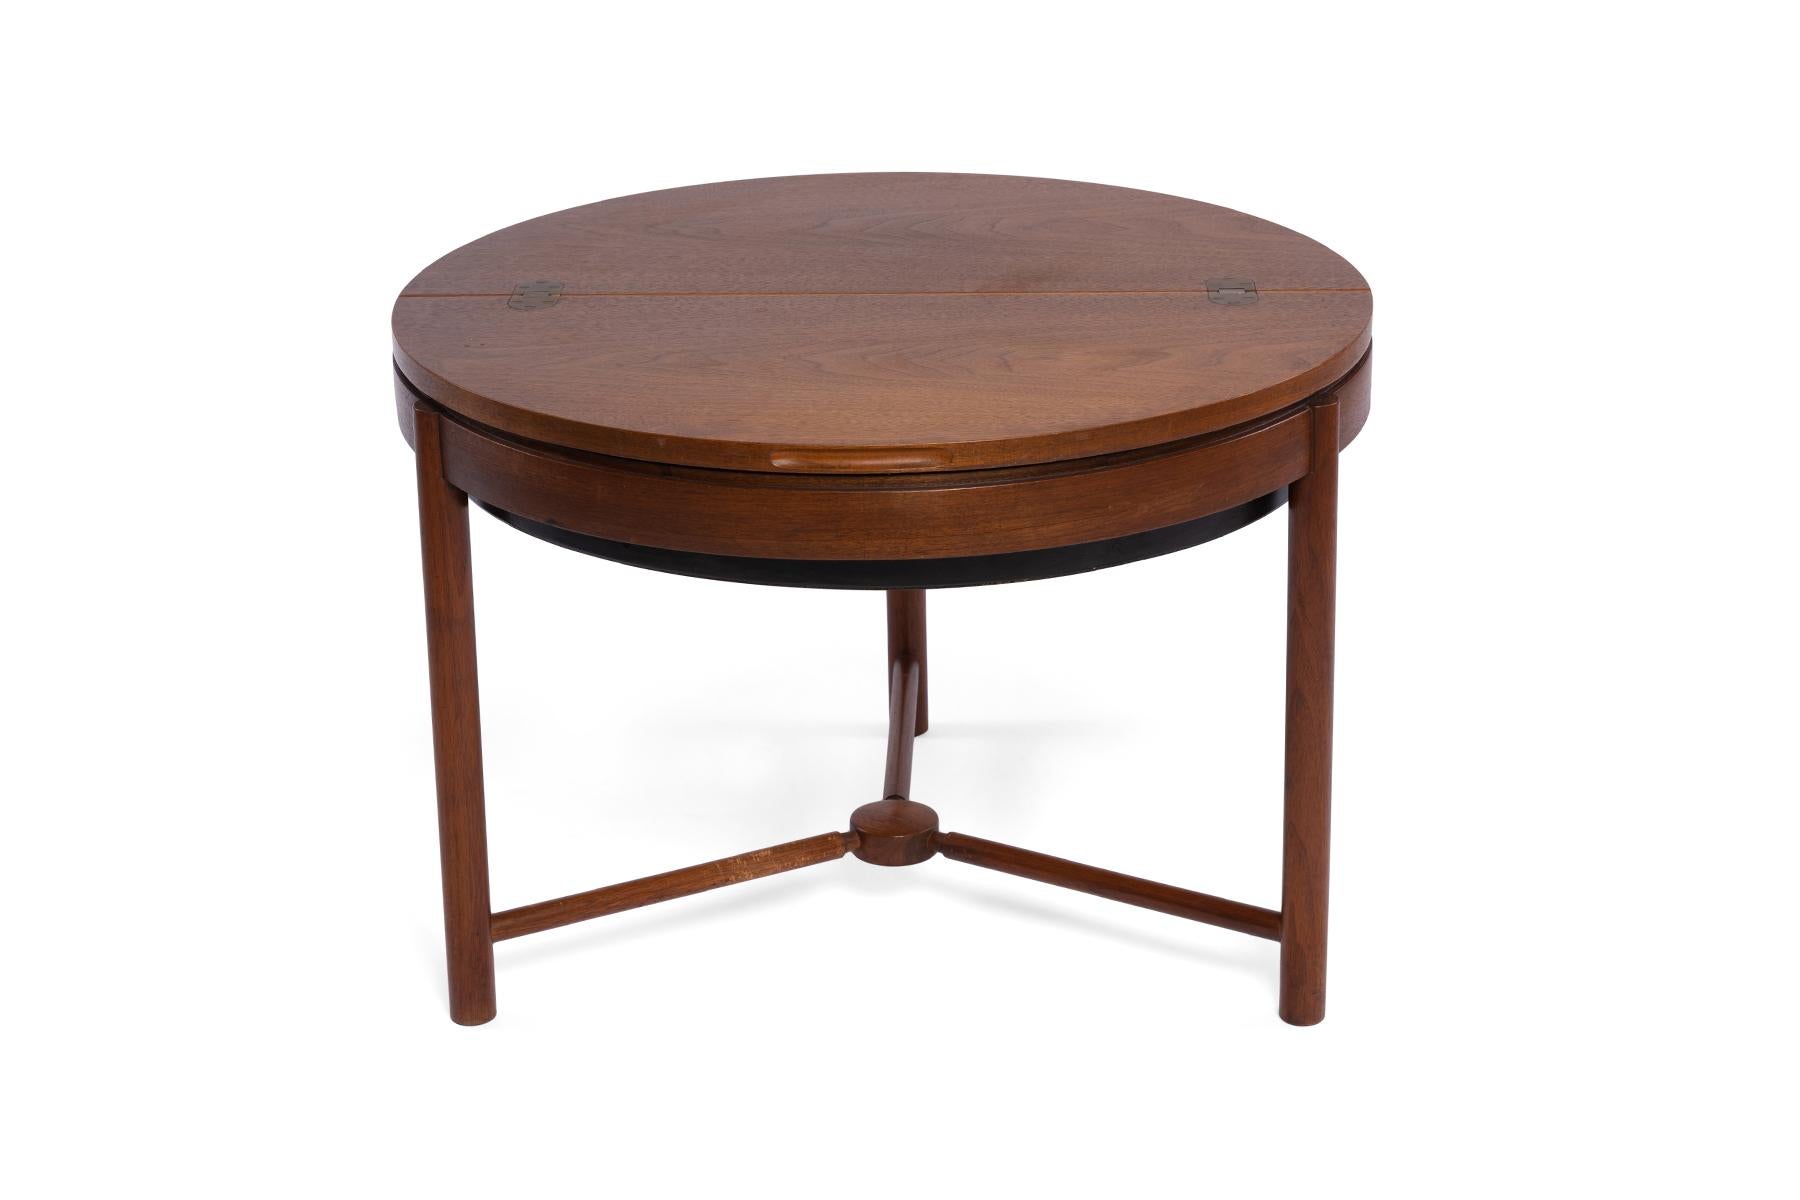 All original sewing table in teak by Rastad and Rellling. This fun example that can be used as a side or occasional table has a divided interior compartment that swivels. The design won the Norwegian Design Competition in 1962.